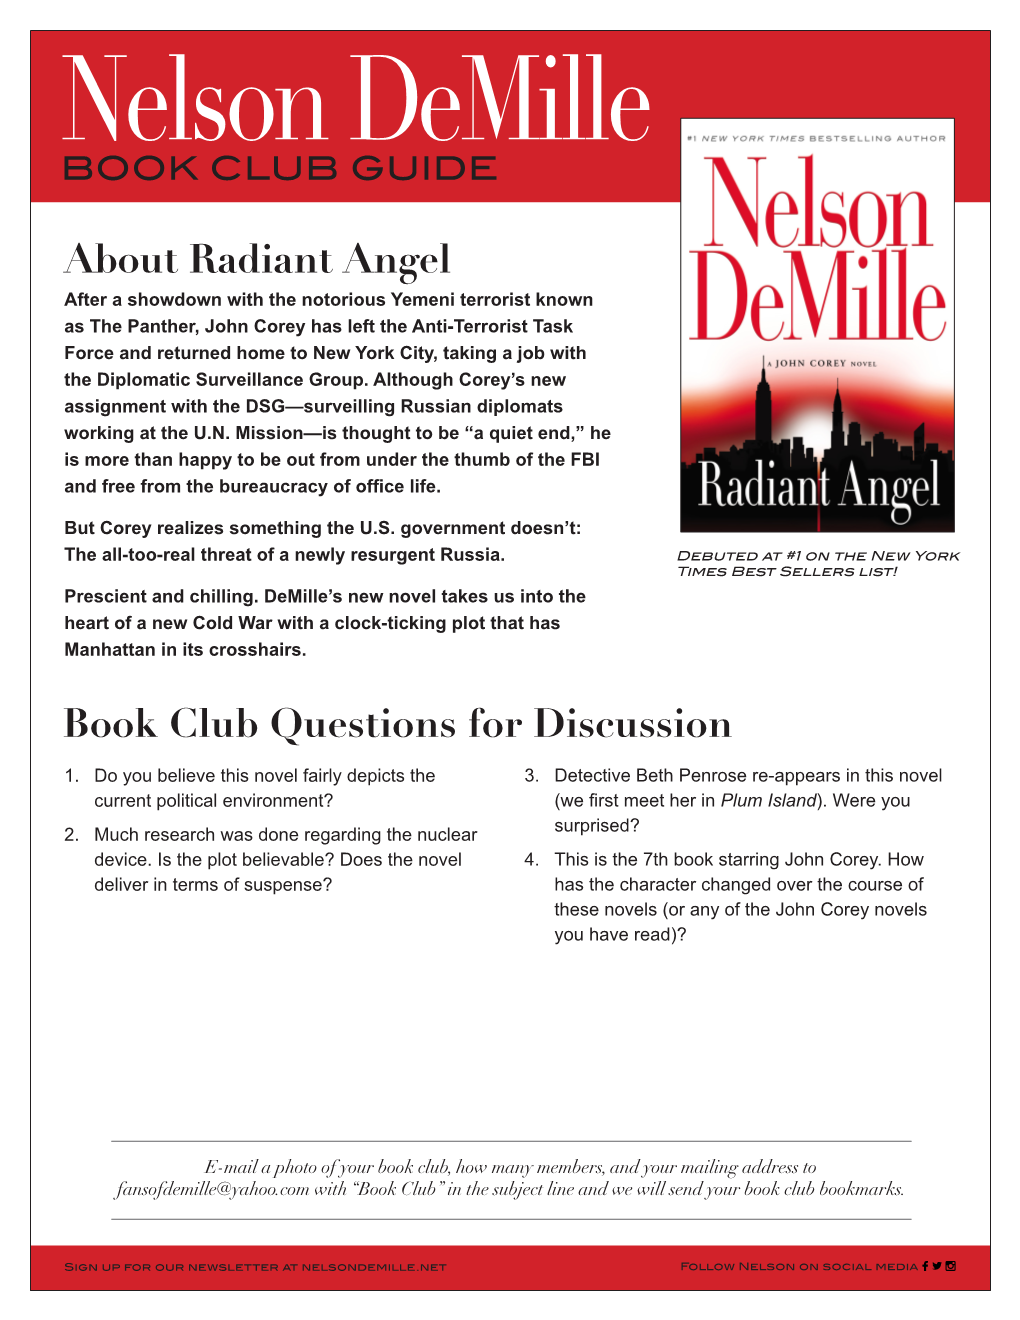 About Radiant Angel Book Club Questions for Discussion